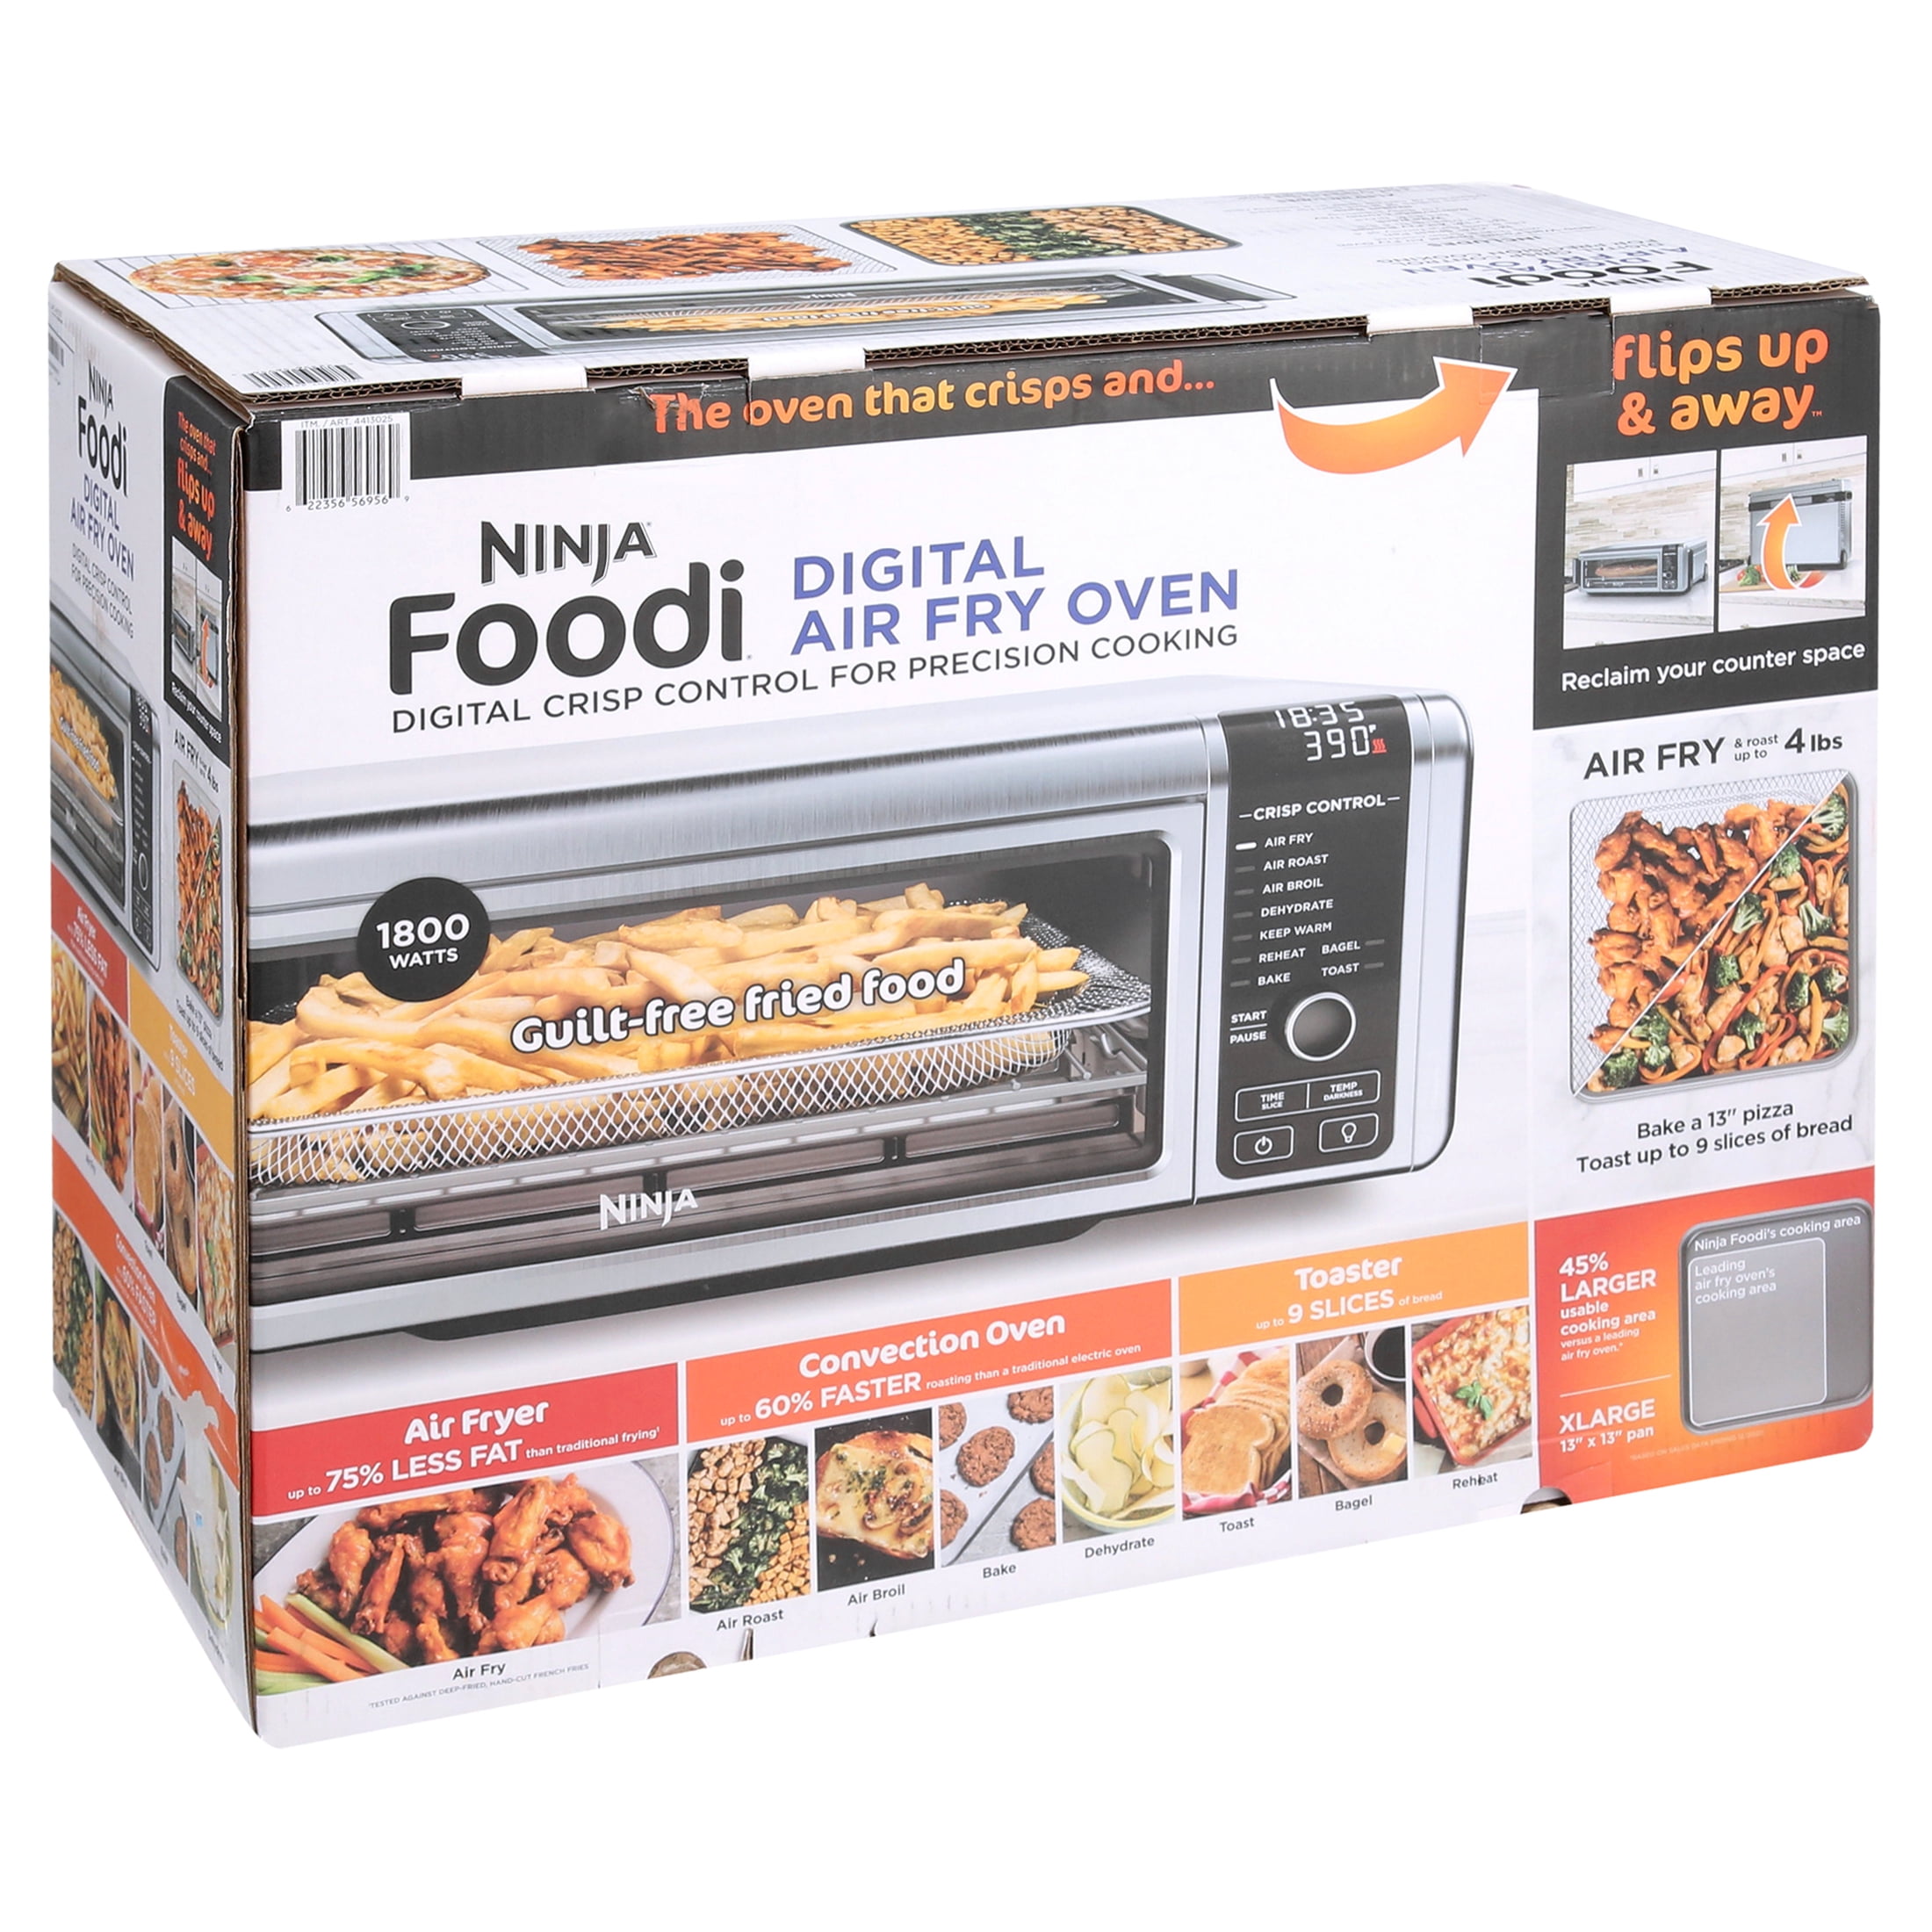 Ninja FT102A Foodi 9-in-1 Digital Air Fry Oven with Convection